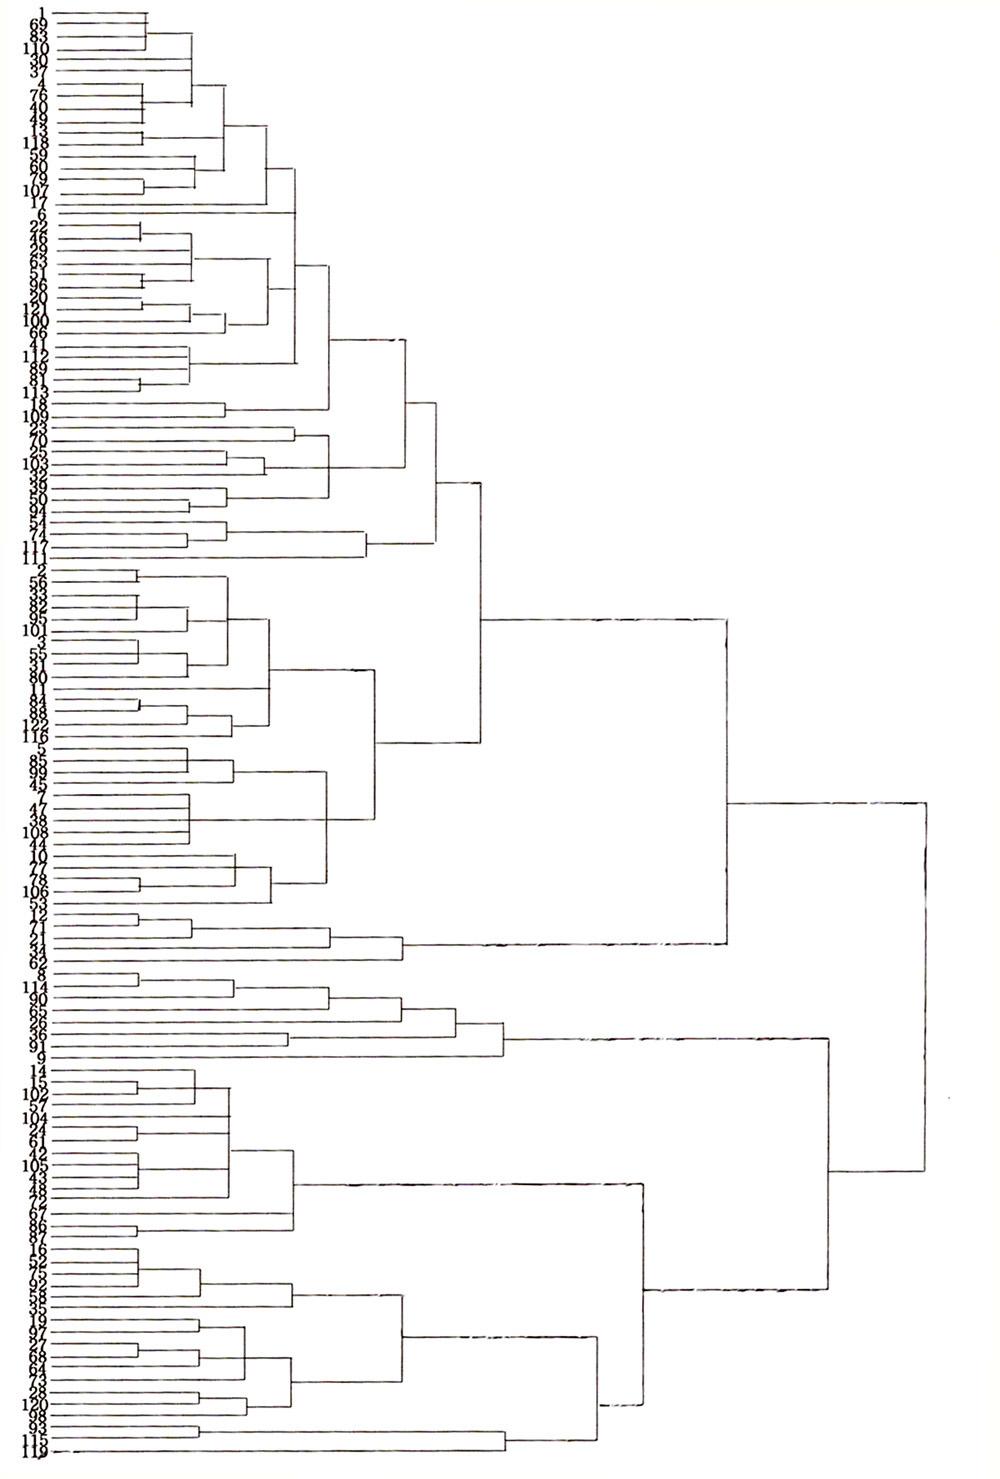 Dendrogram of red leaf lettuce varieties classified by characteristic distance based on principal component analysis.